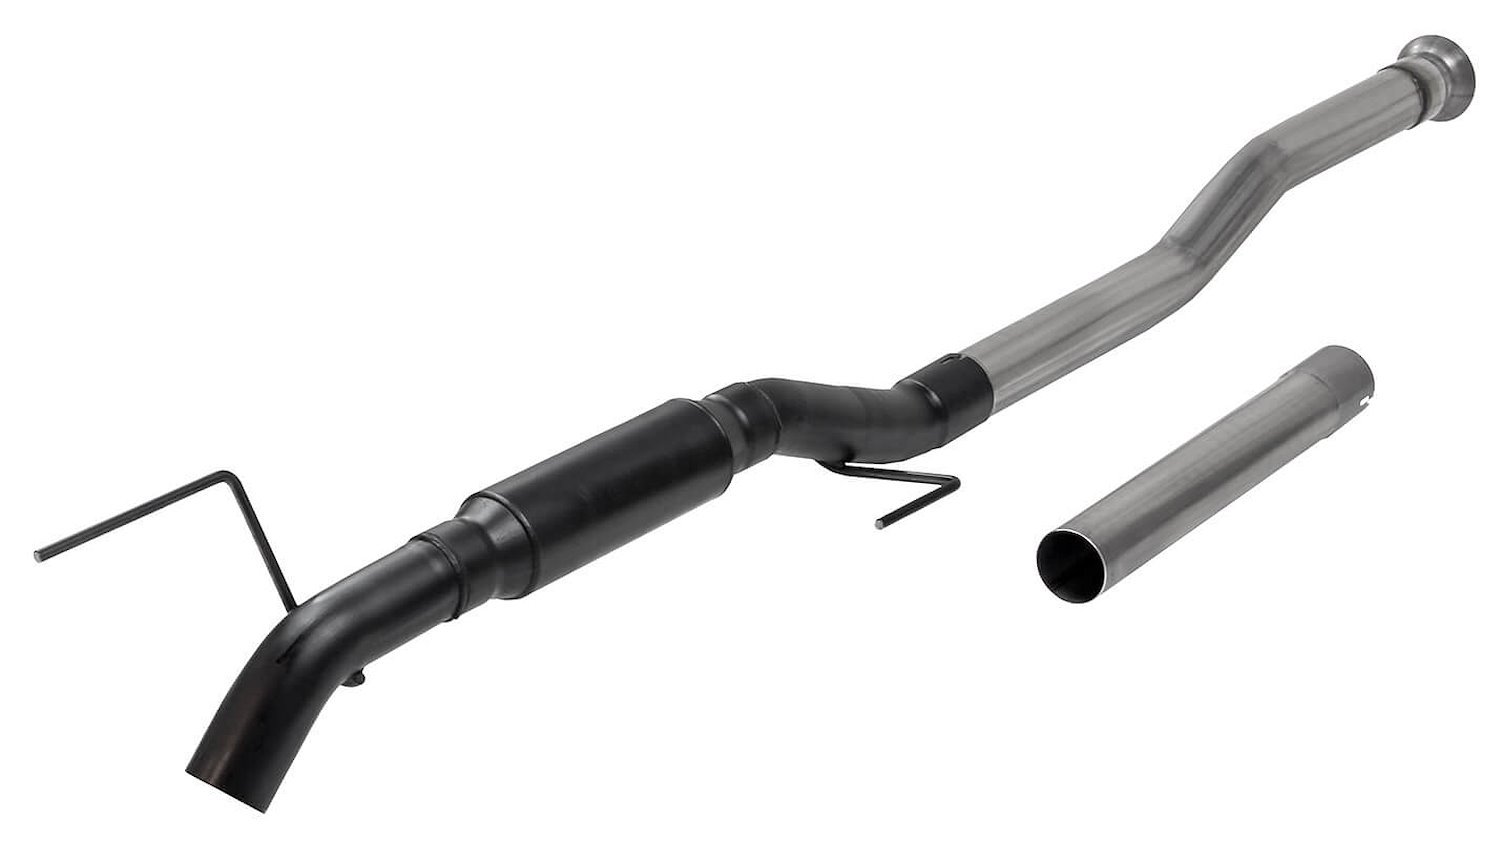 Outlaw Extreme Series Cat-Back Exhaust System Fits Select Ford F-150 Trucks 2.7L, 3.5L, 5.0L